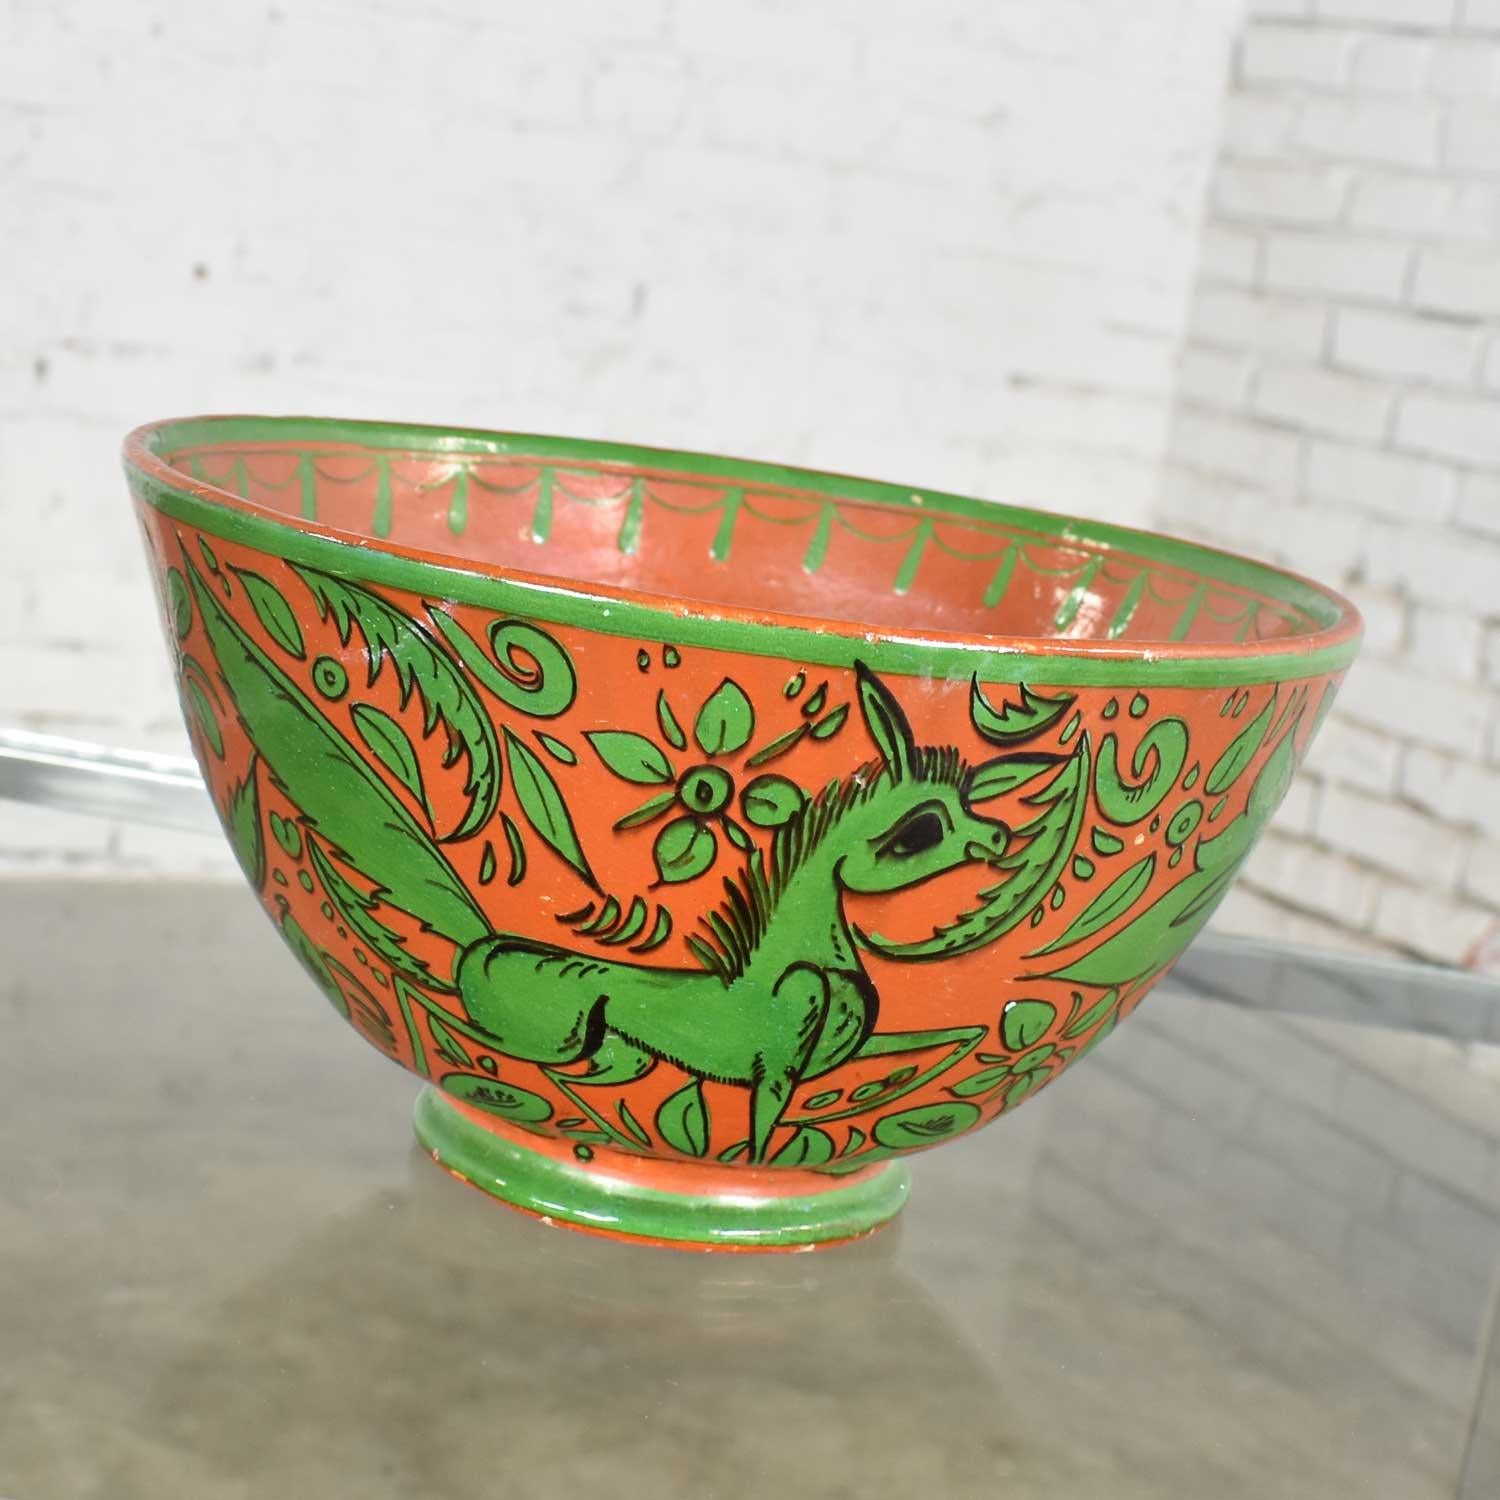 Handsome mid-20th century Tlaquepaque Mexican large terracotta colored pottery bowl with green Fantasia pattern of stylized deer and foliage. It is in fabulous vintage condition. There are no chips, cracks, or chiggers that we have seen. There are